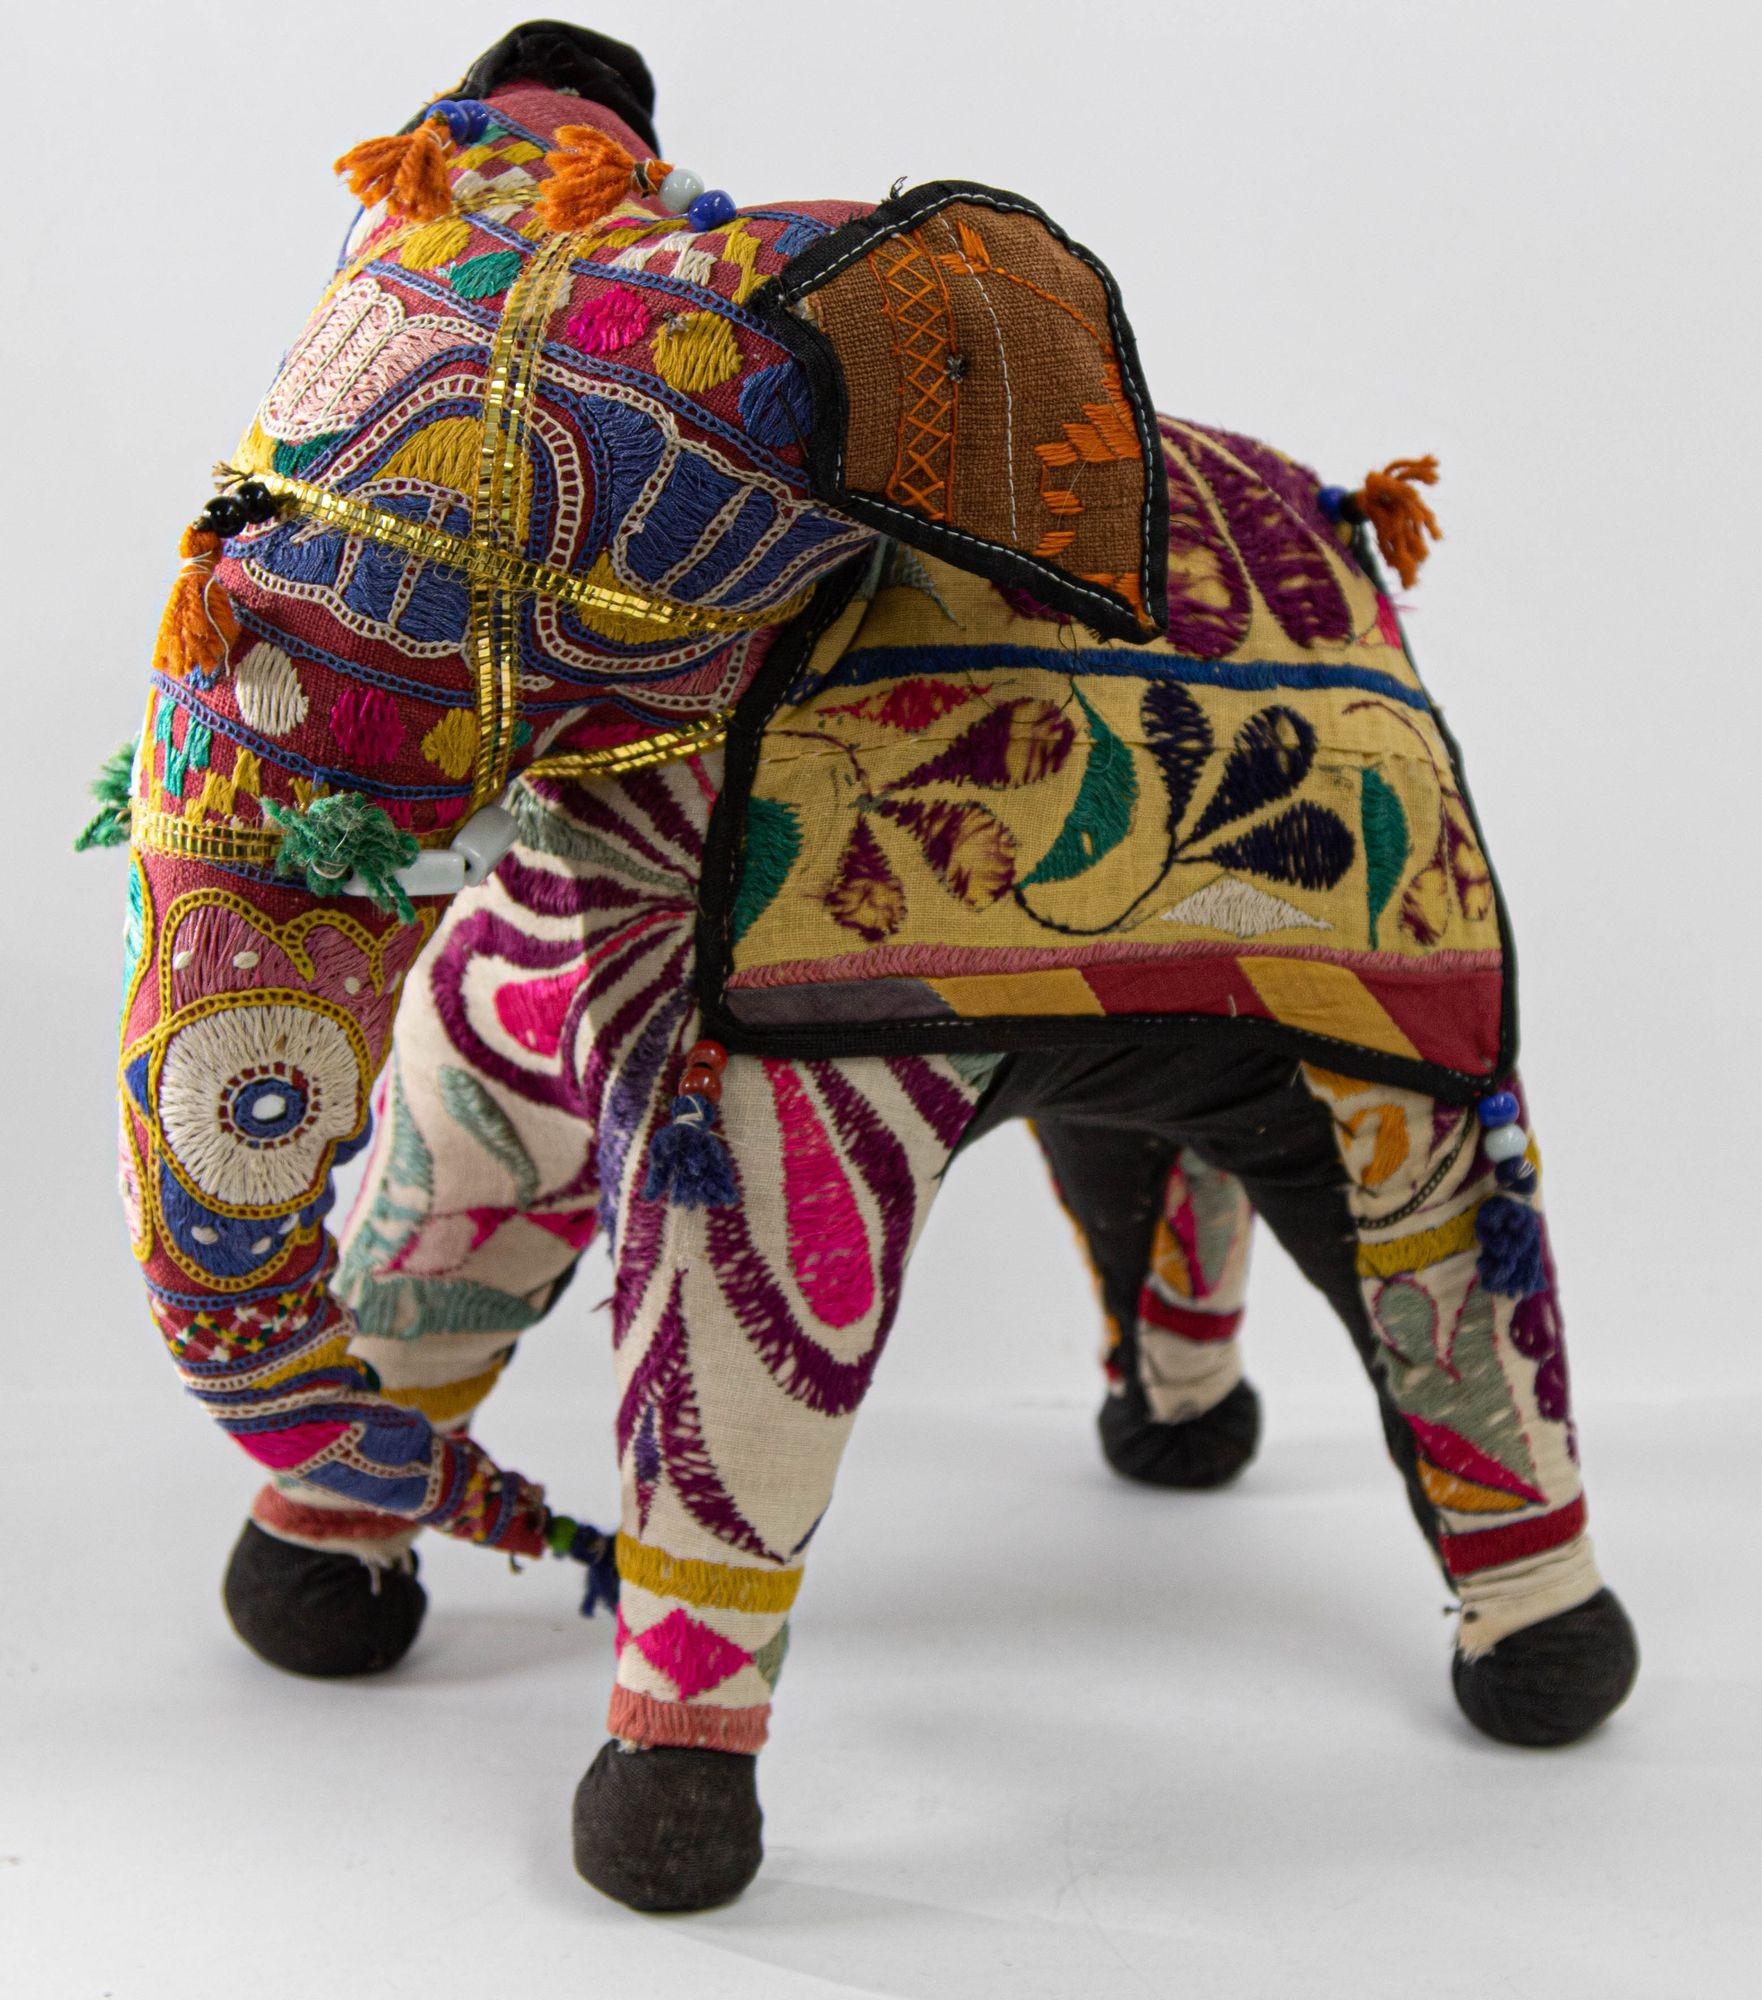 Vintage Handcrafted Stuffed Cotton Embroidered Ceremonial Elephant Toy Raj India en vente 4